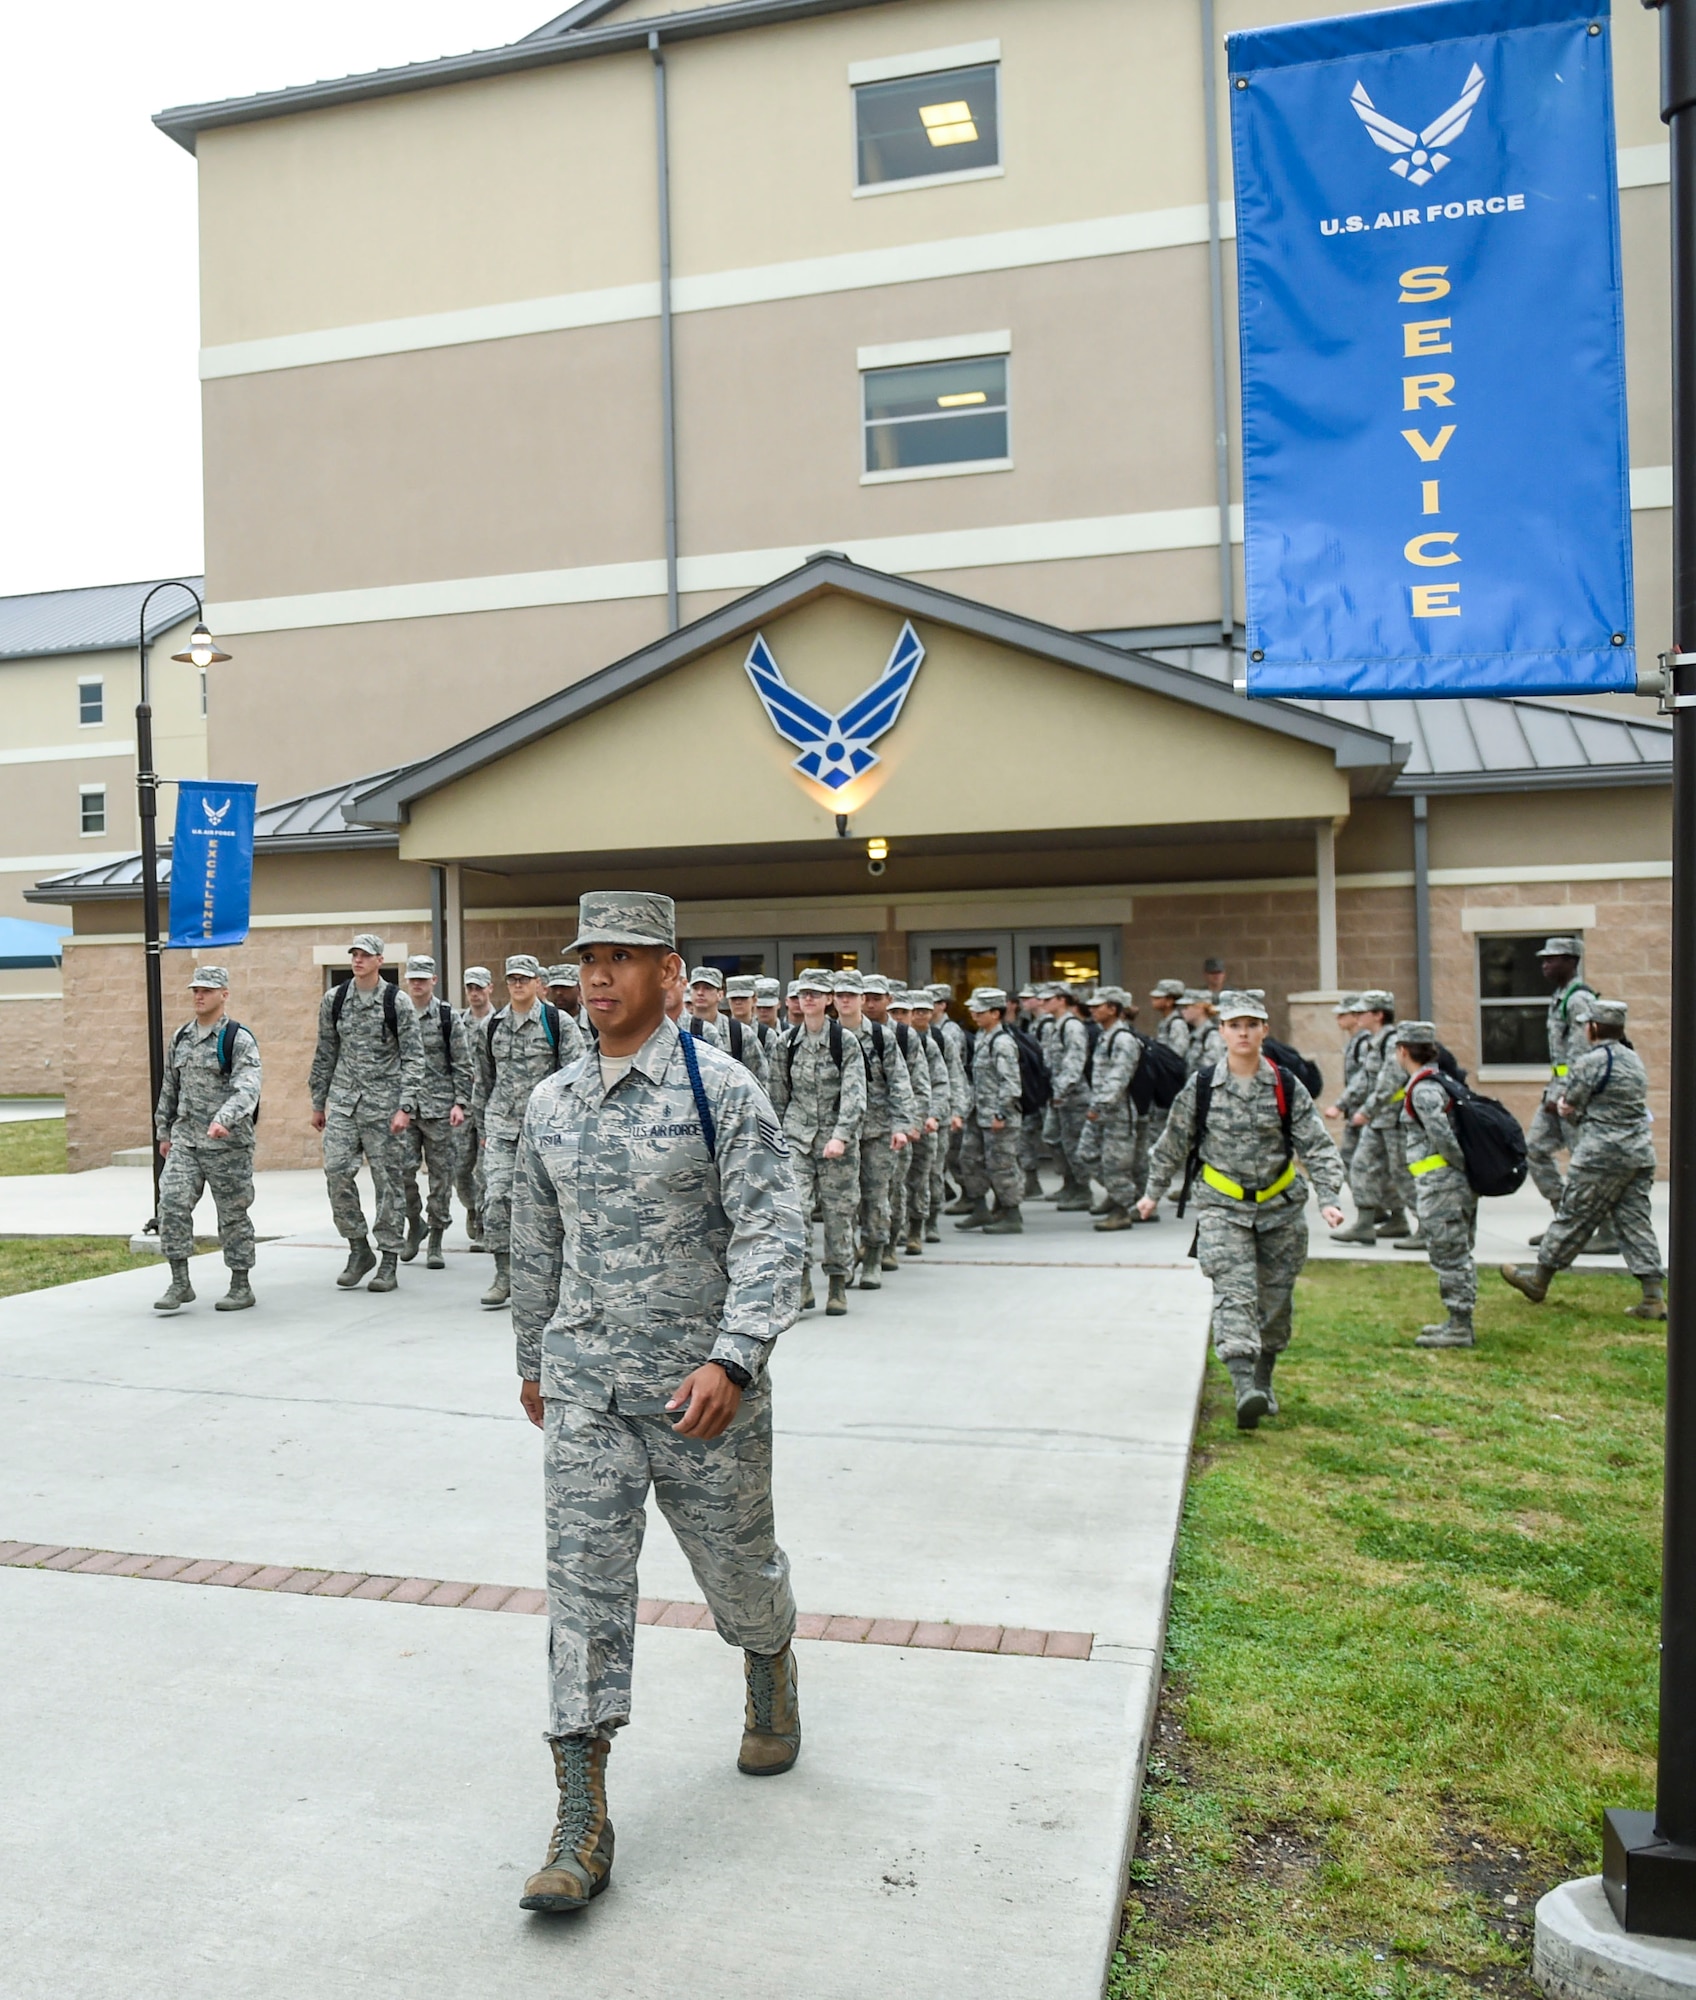 Staff Sgt. Mark Visita, 59th Training Group military training leader, marches technical training students to class April 14, 2016, on Joint Base San Antonio-Fort Sam Houston, Texas. Less than two dozen military training leaders are responsible for more than 5,000 technical training students annually. (U.S. Air Force photo/Staff Sgt. Michael Ellis) 